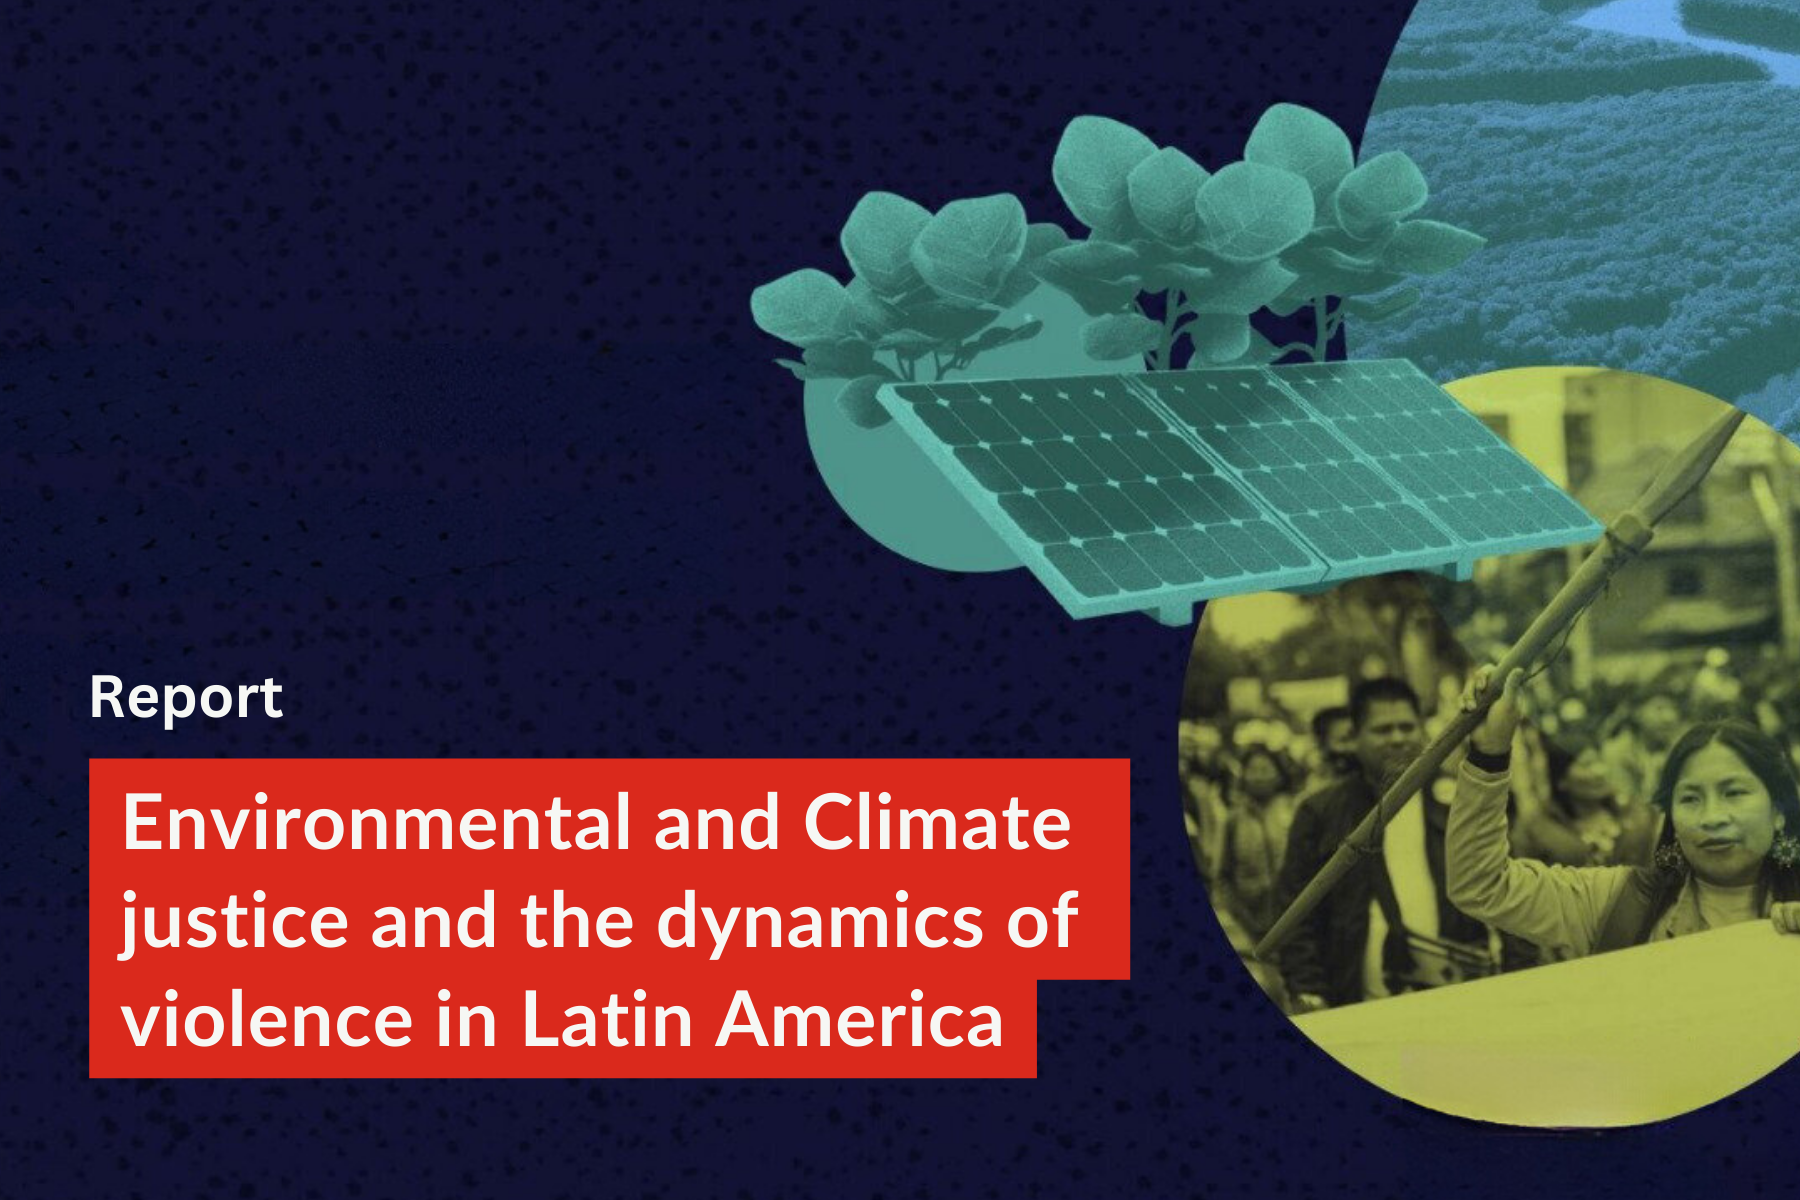 Sharepic on "Environmental and climate justice and the dynamics of violence in Latin America". 